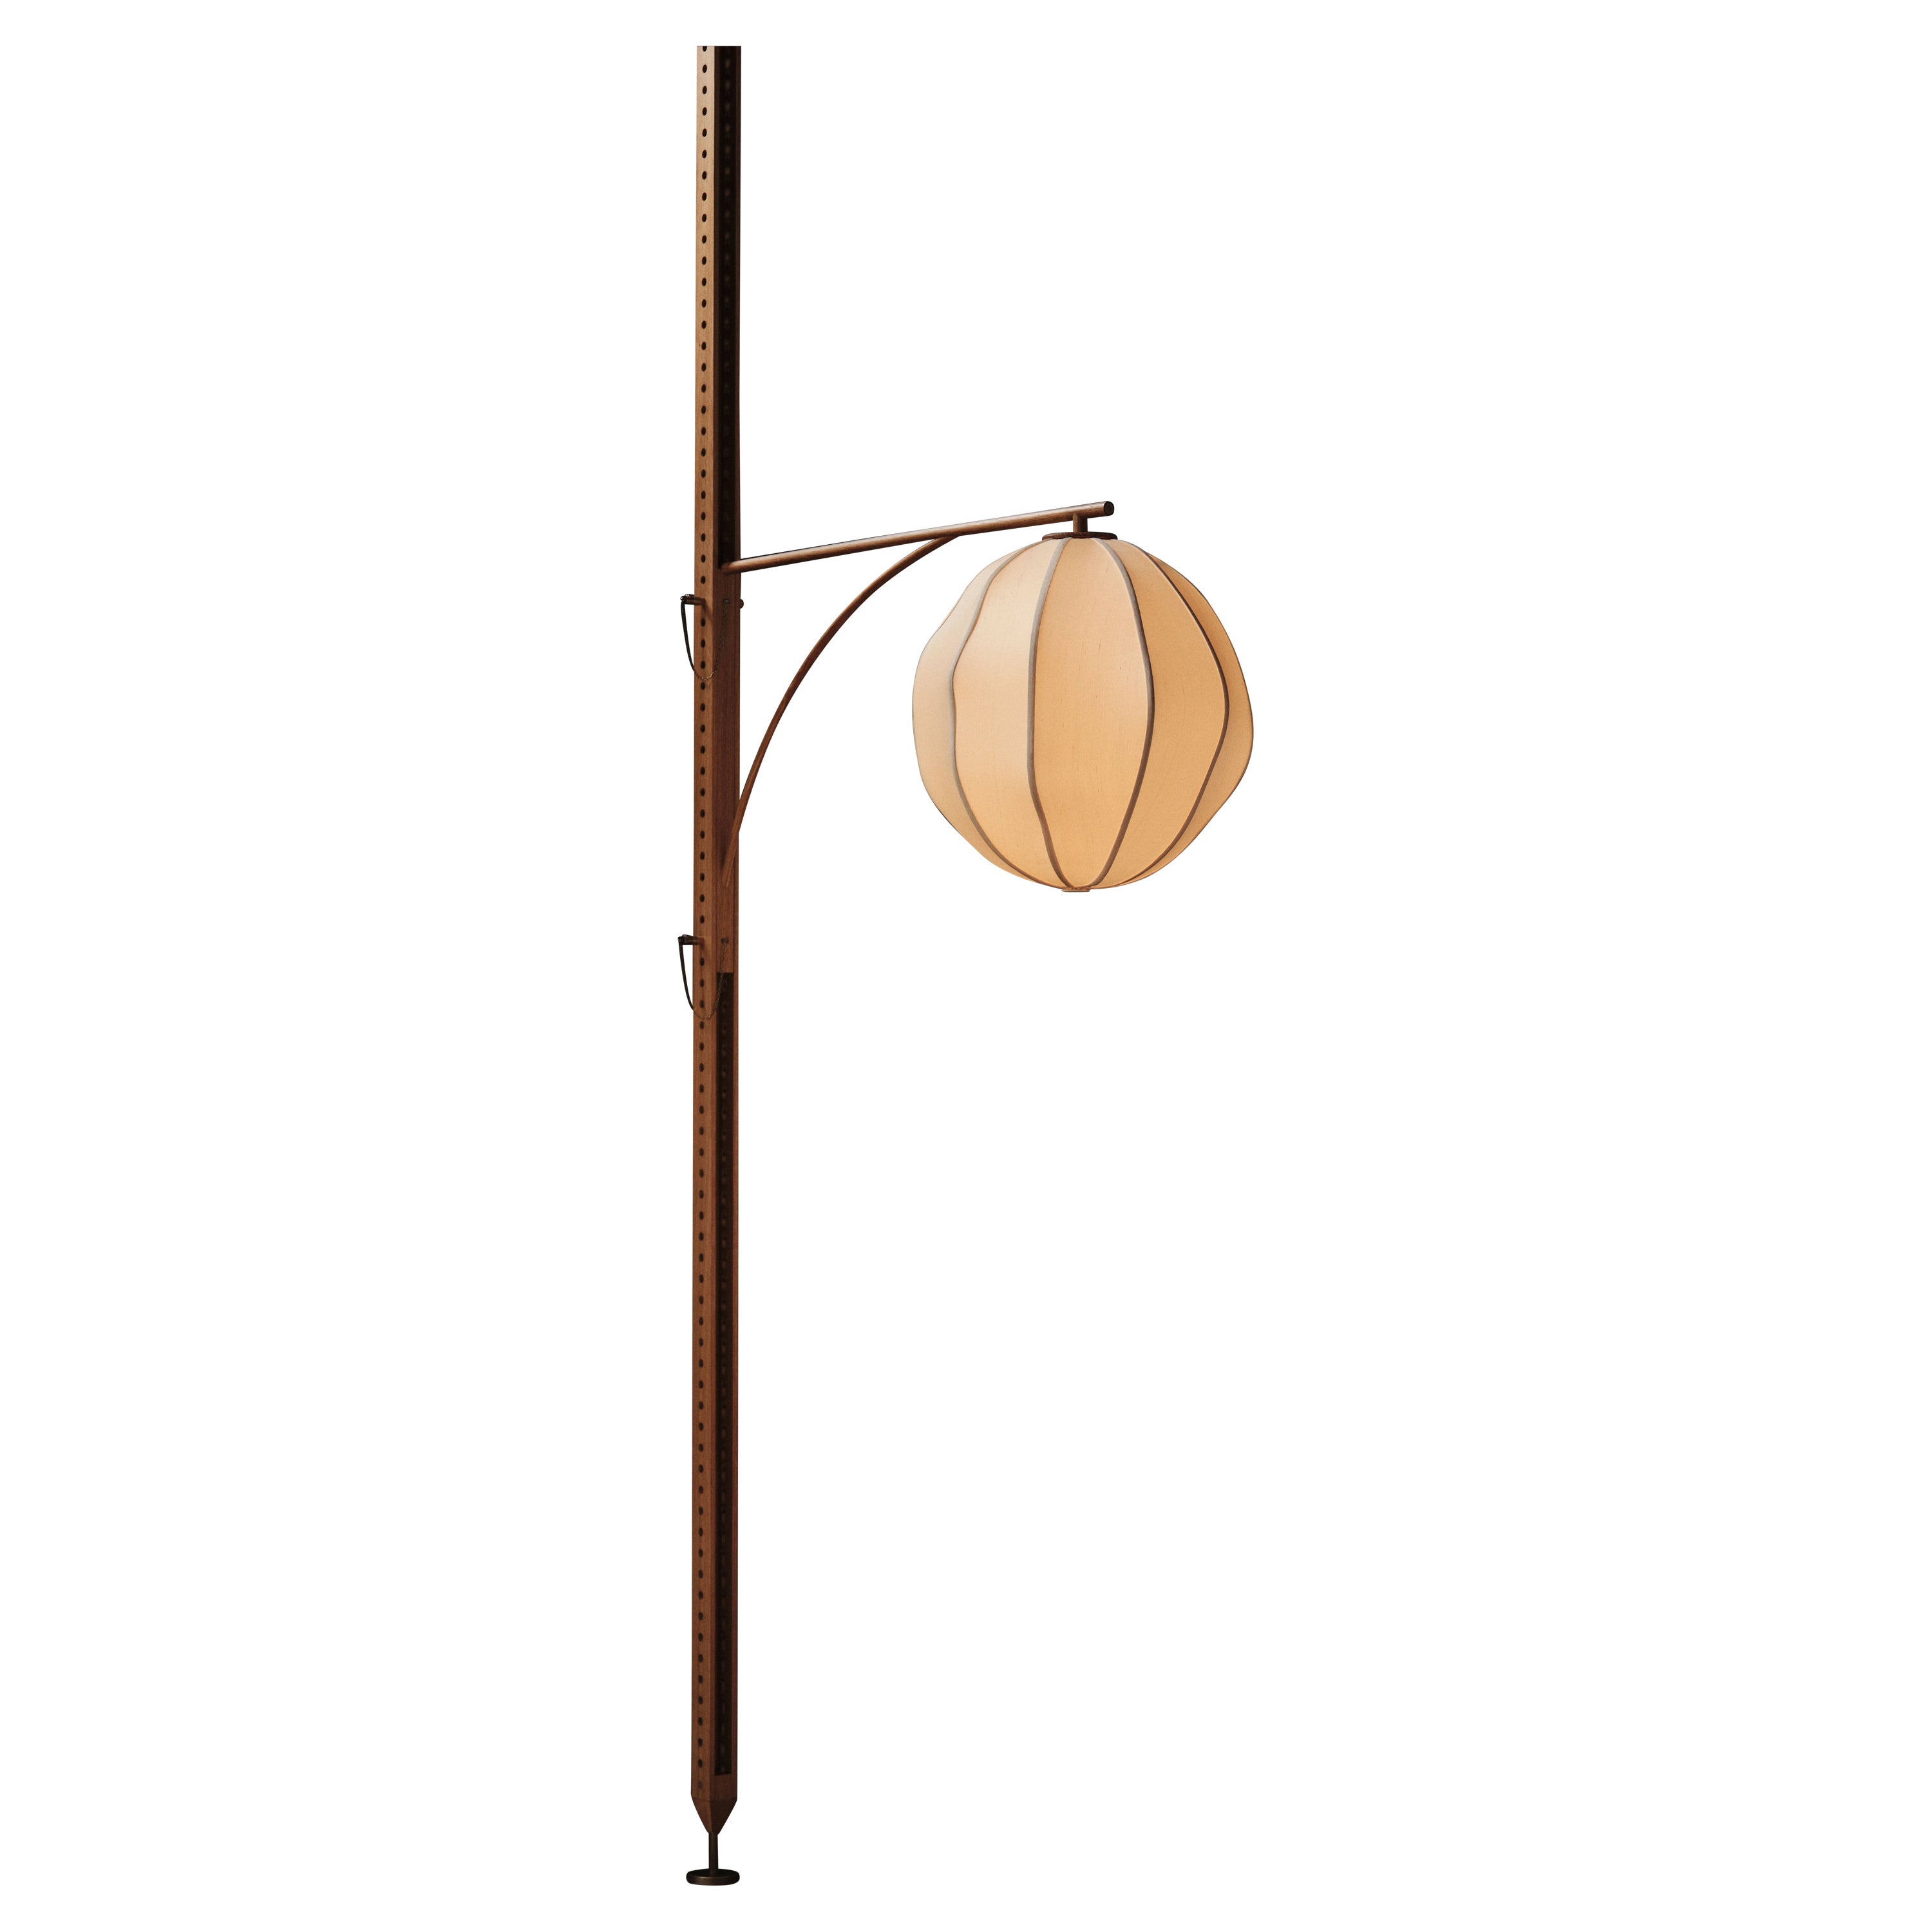 Anna Karlin Mulberry Globe Floor-to-Ceiling Lamp For Sale